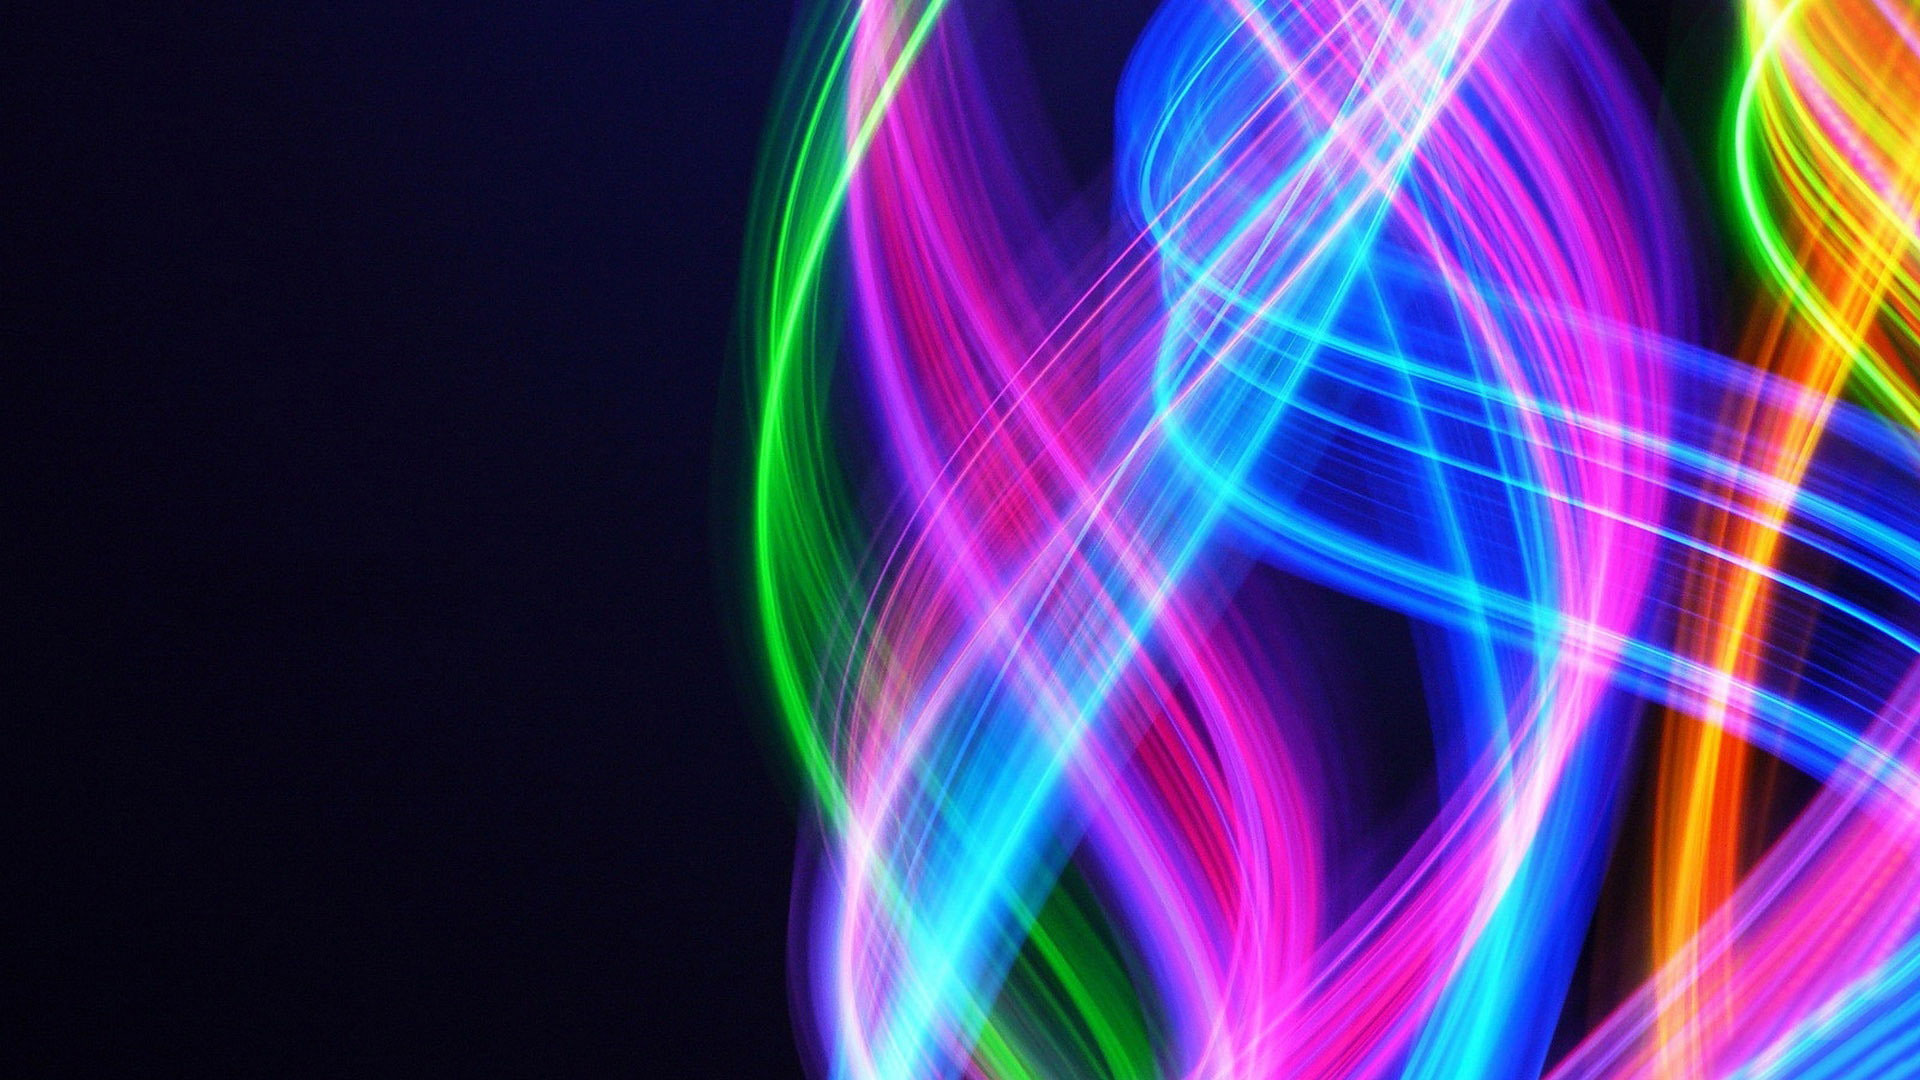 Wallpaper Abstract, Wave, Neon, Hd, Neon Waves